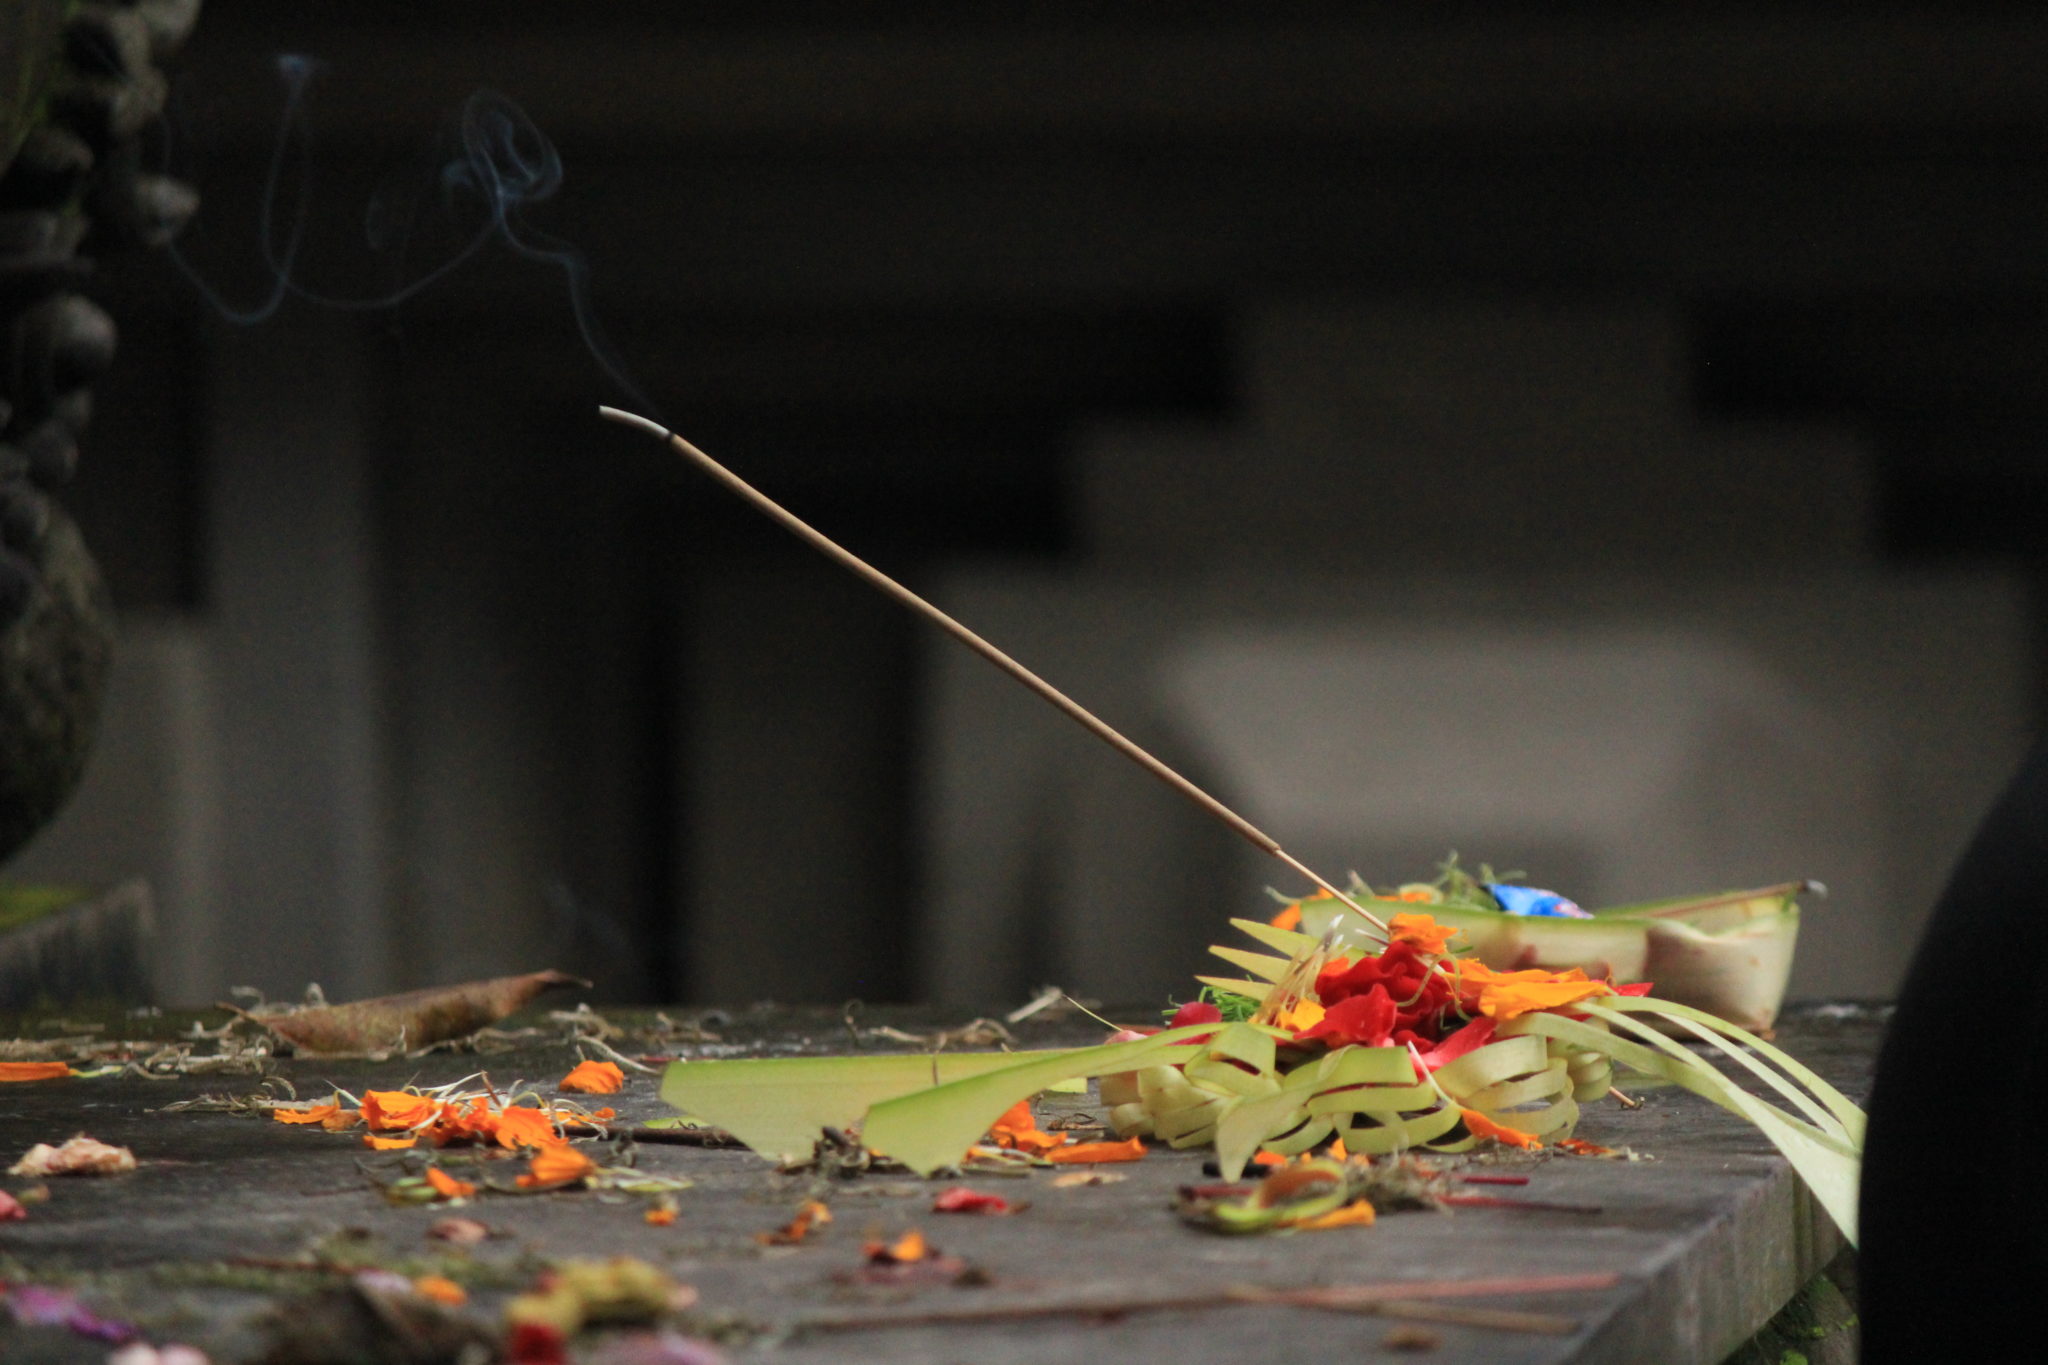 Offerings at a Hindu temple